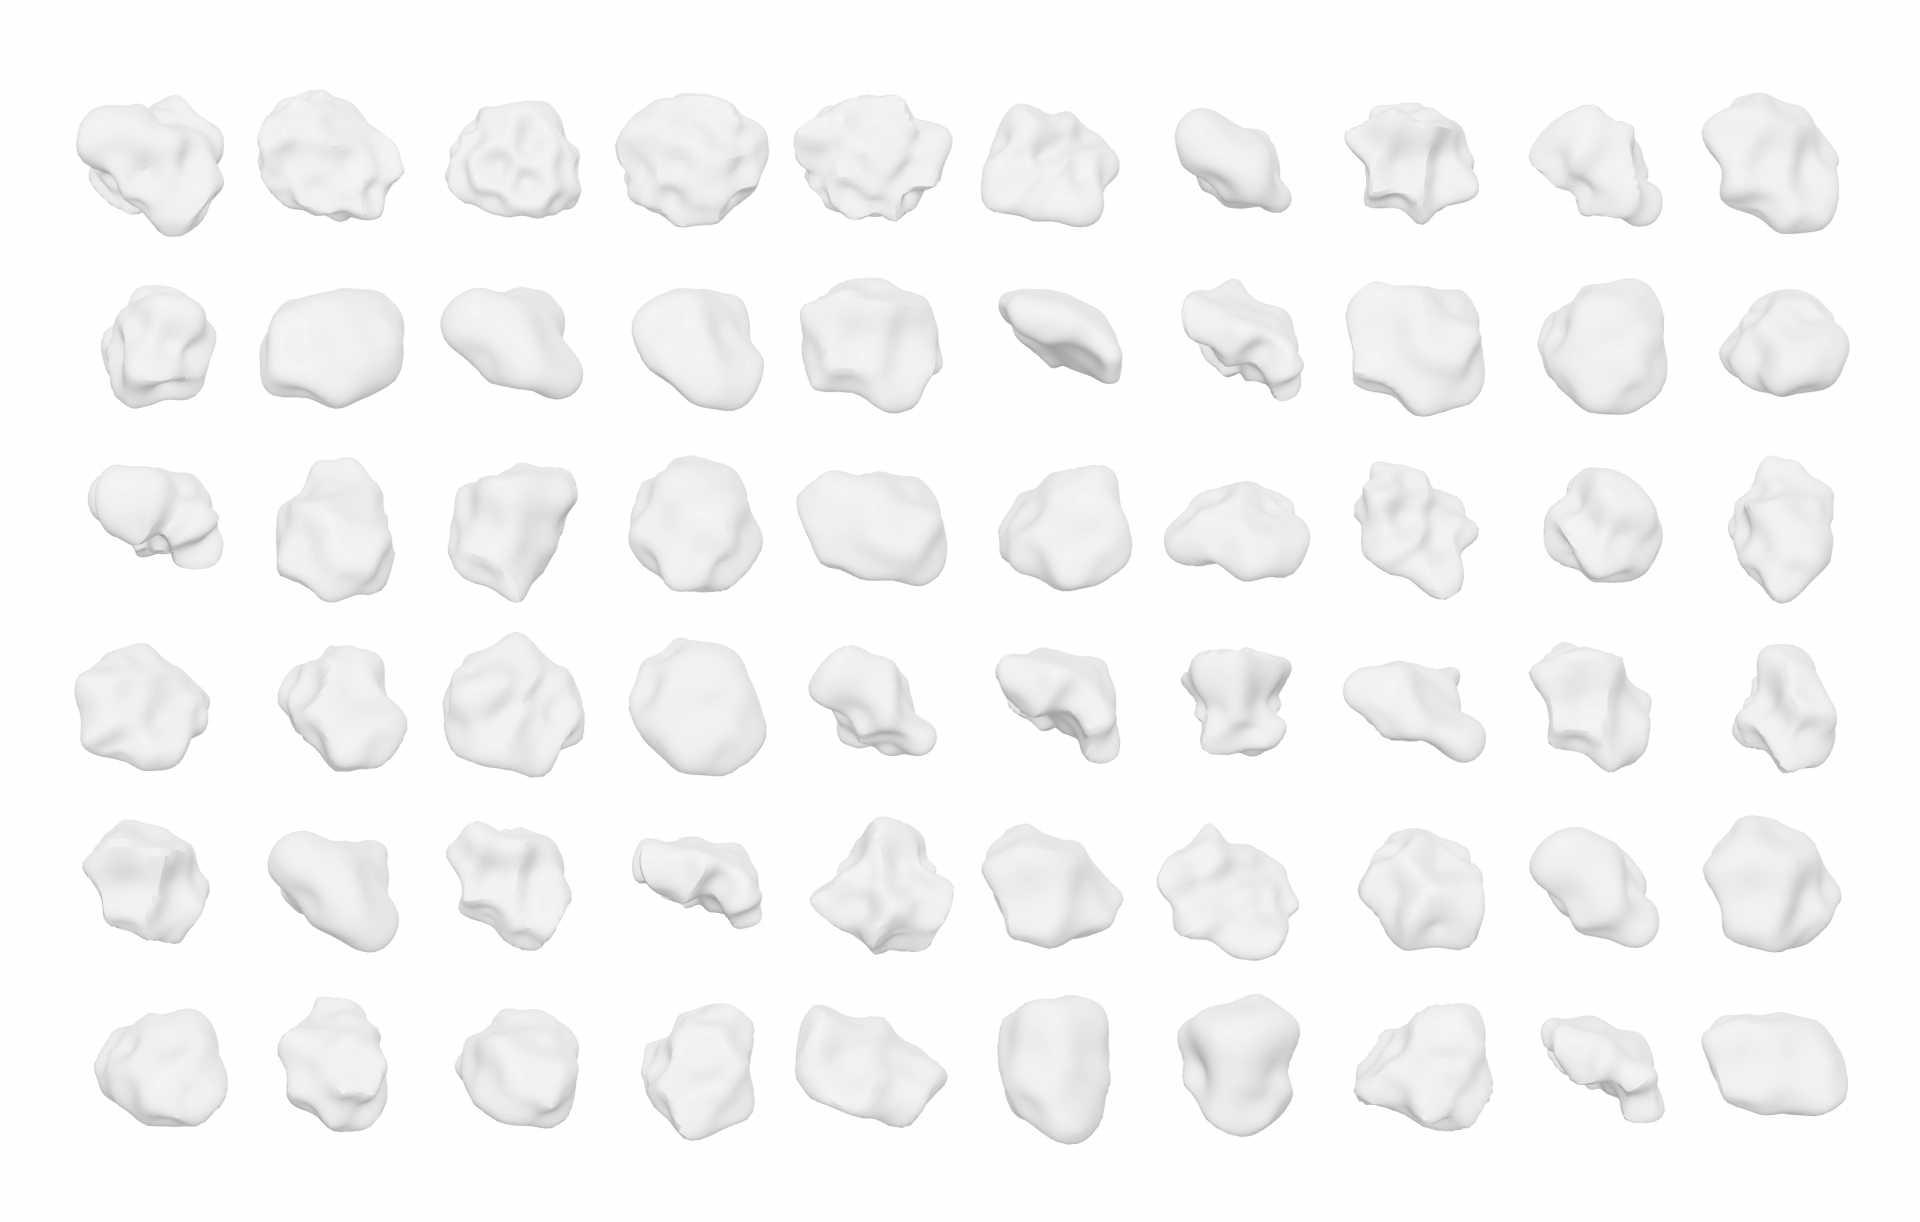 A ten-by-six grid of digitally rendered white rocks of various shapes